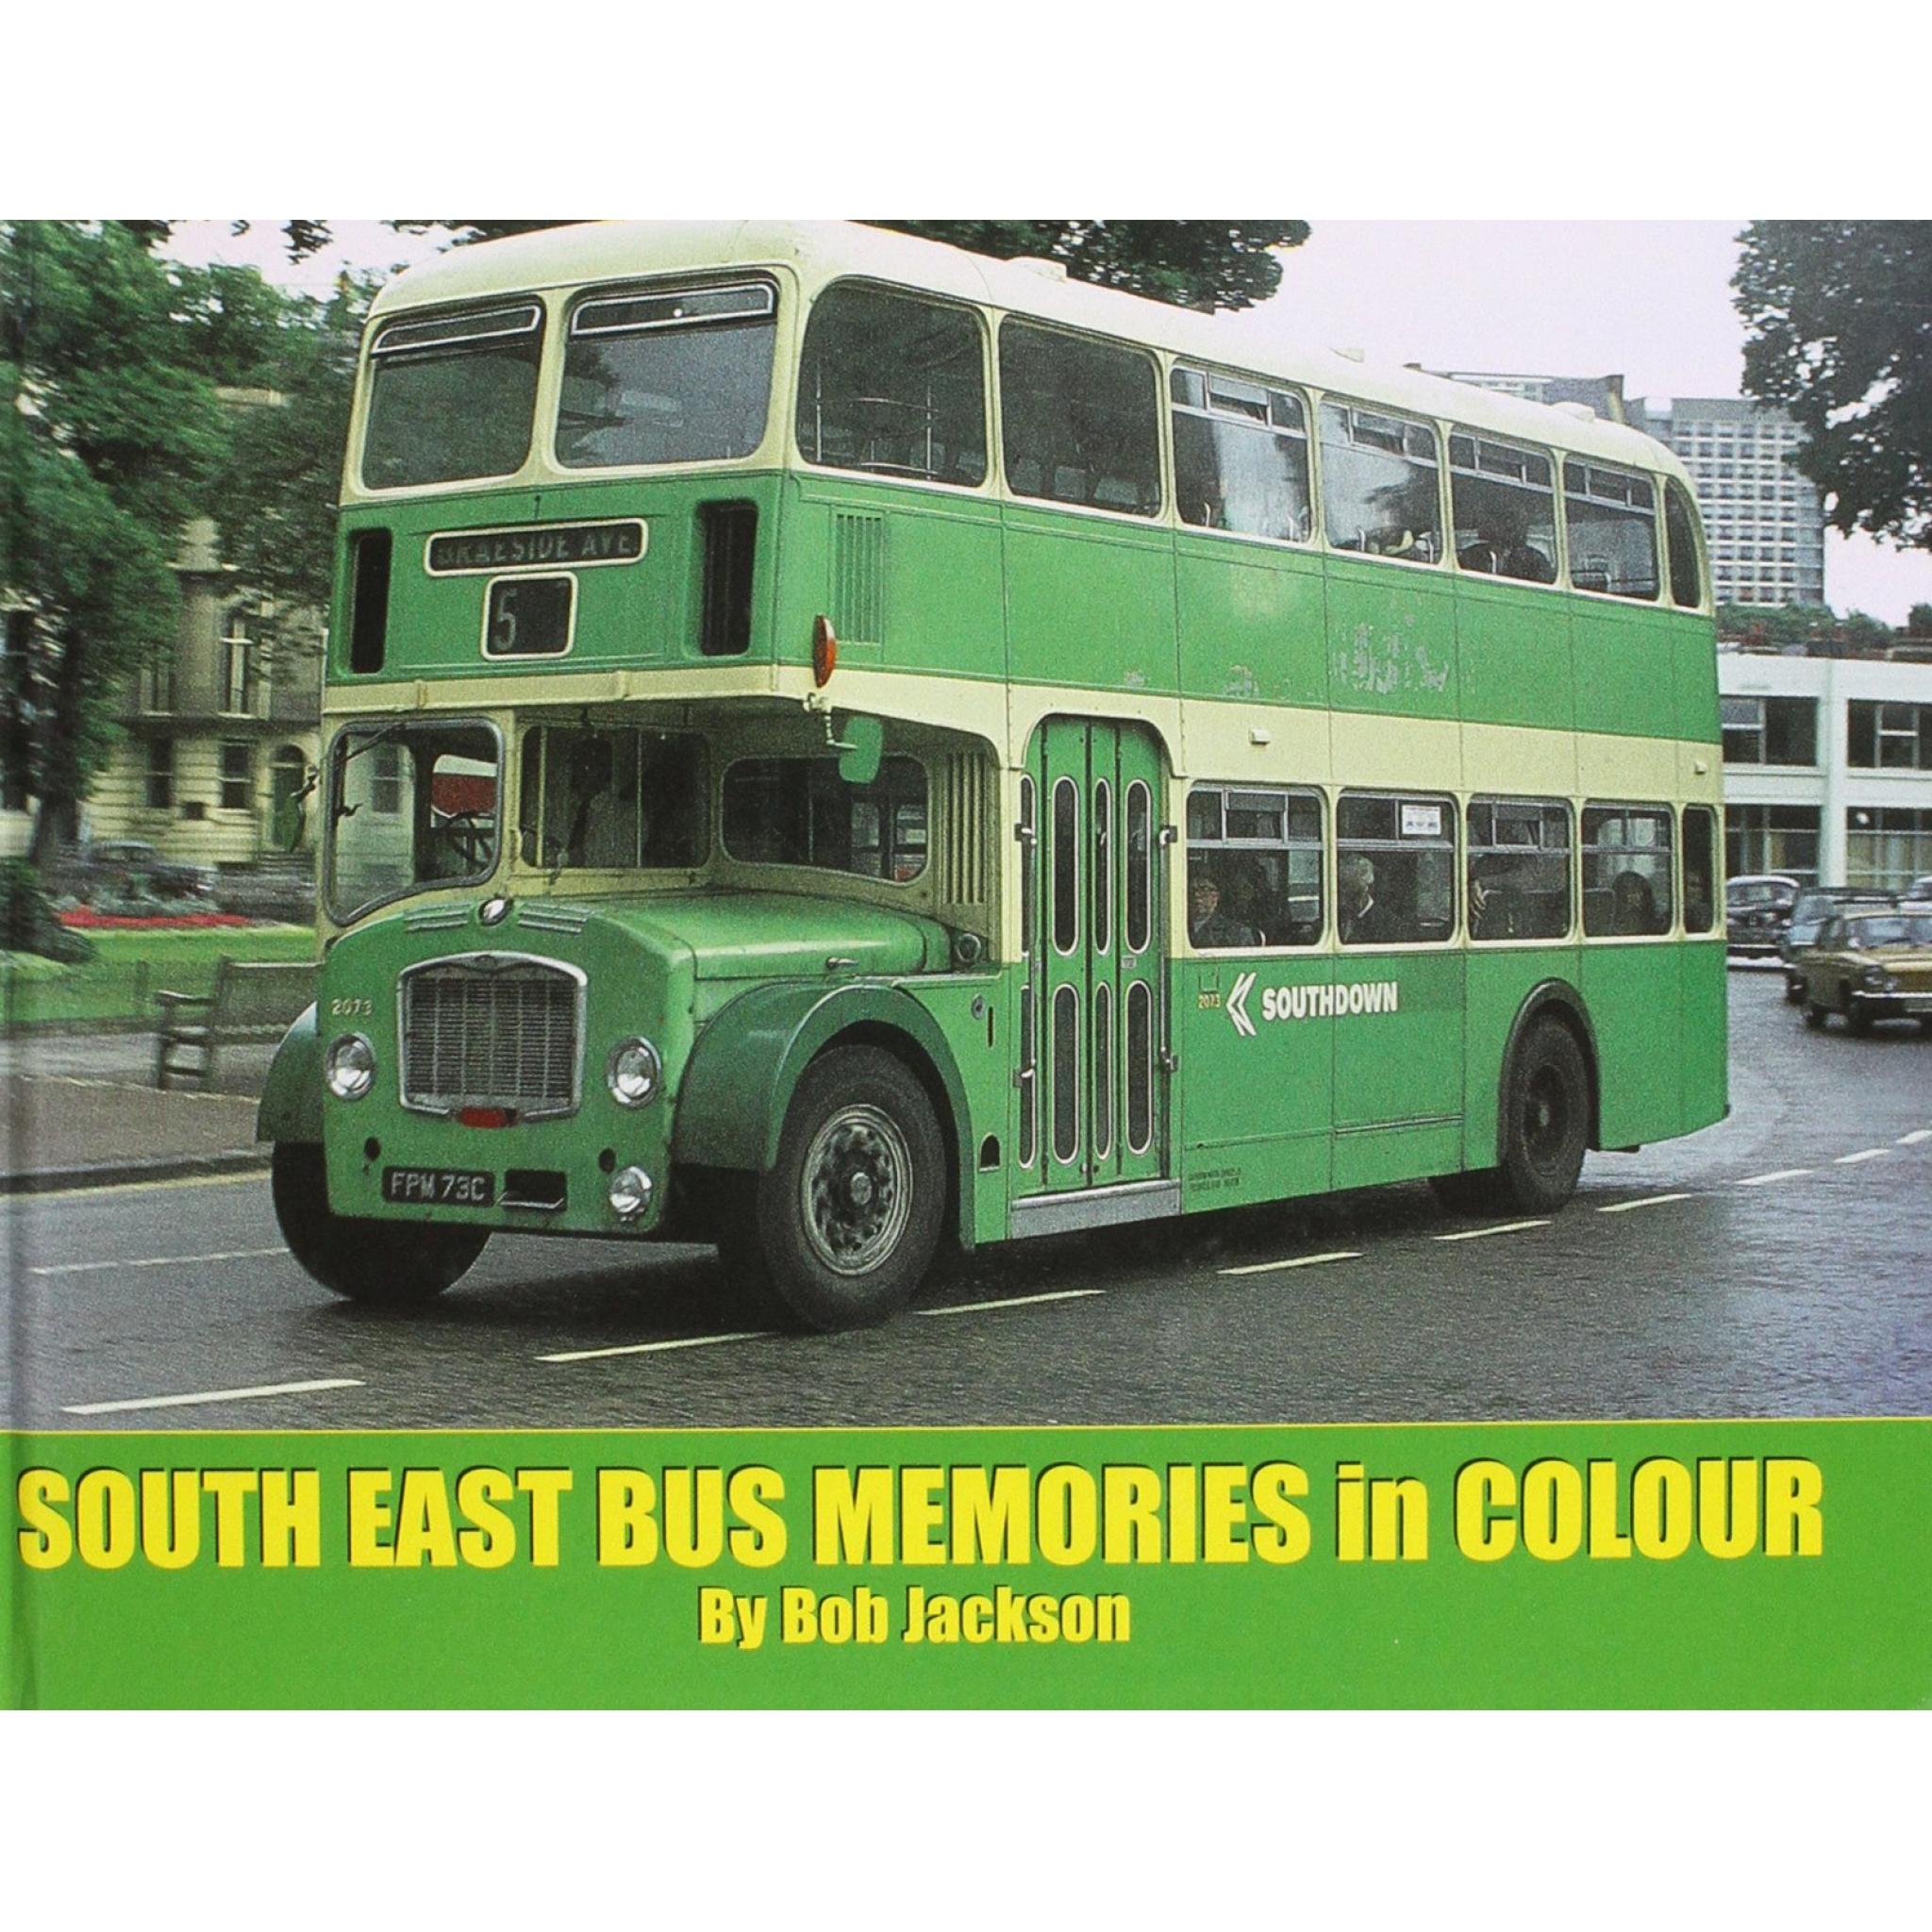 50% OFF RRP is £11.95  South East Bus Memories in Colour